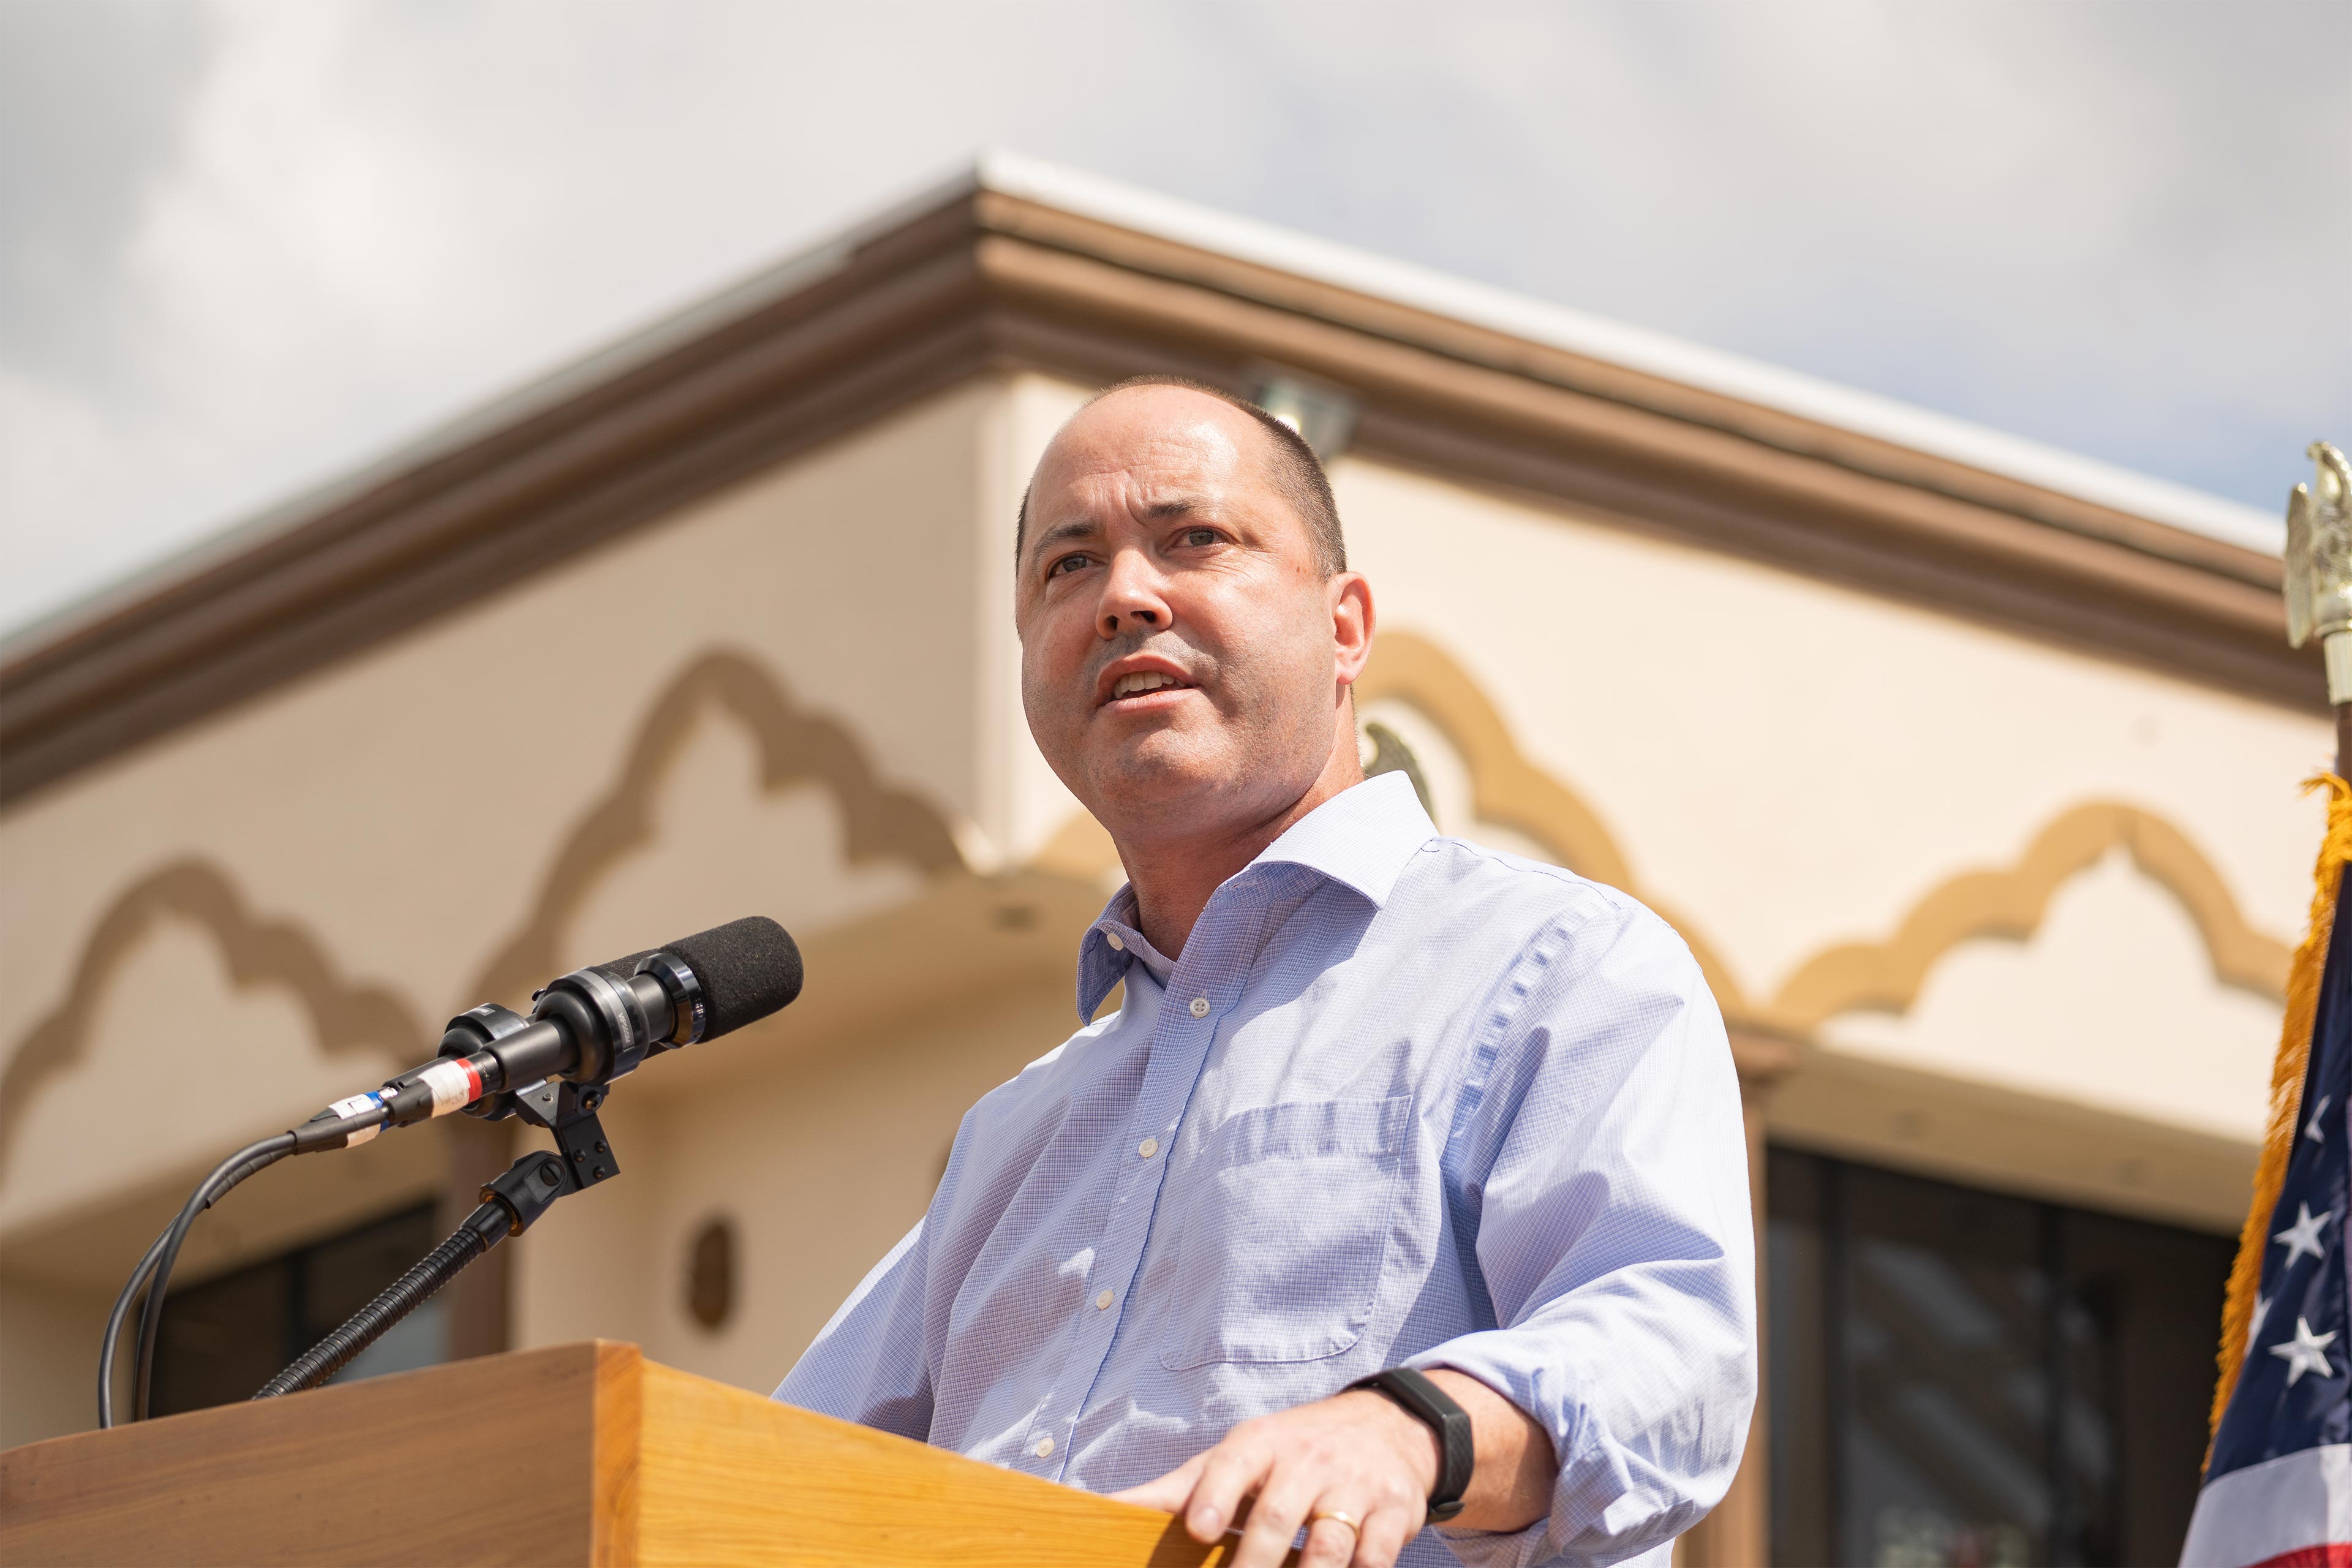 A photo shows Chris Carr speaking into a microphone at a podium outside.